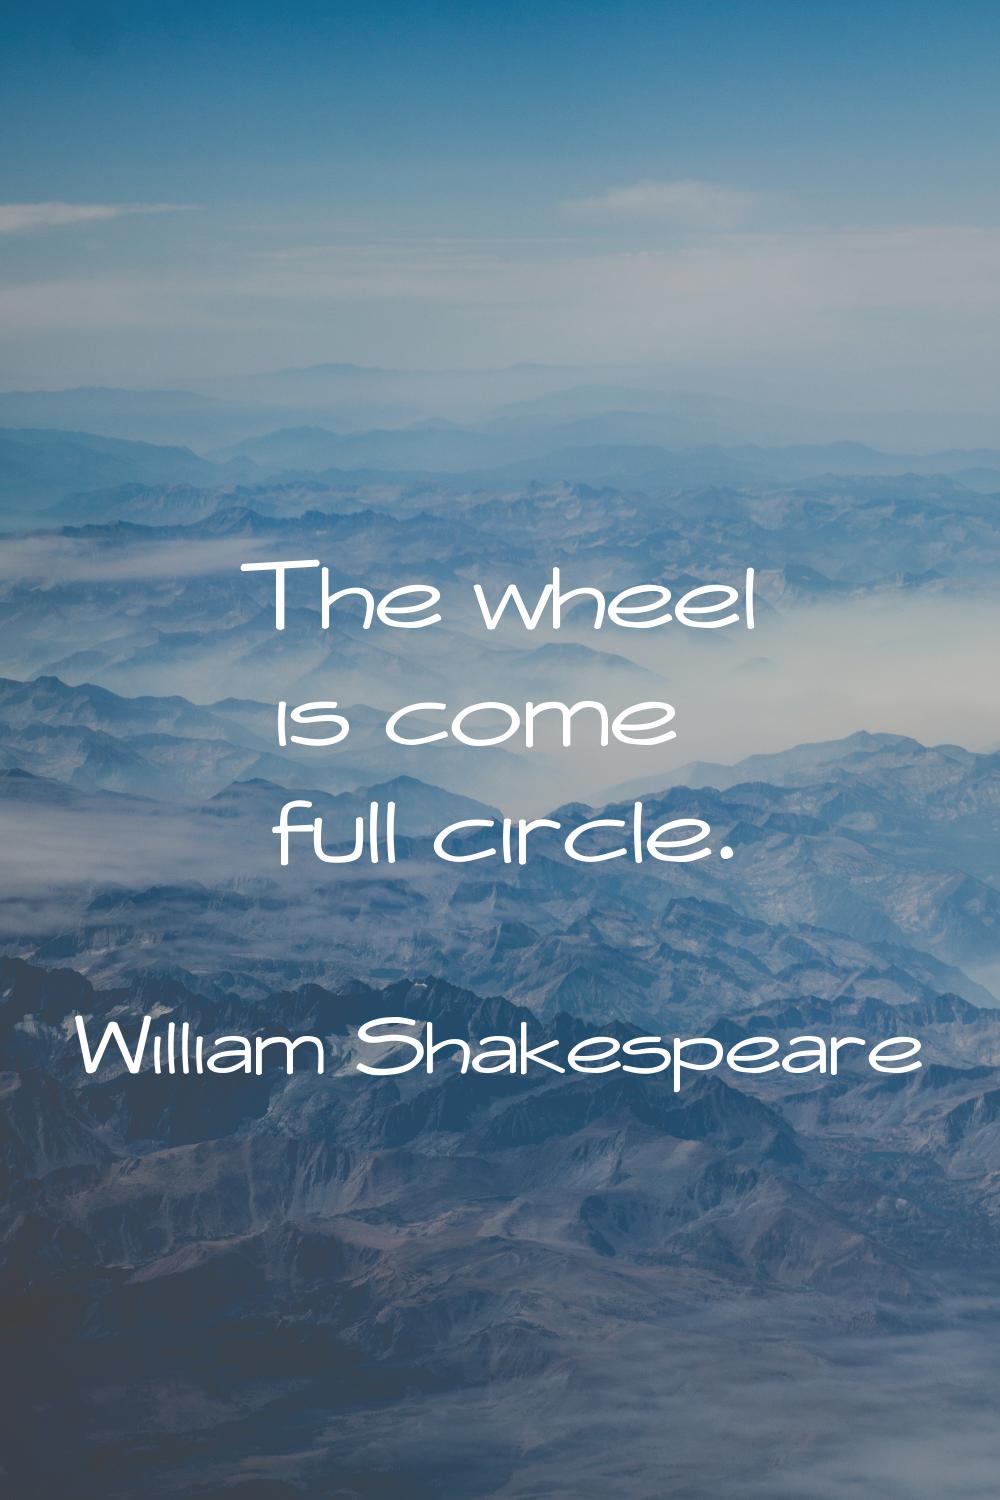 The wheel is come full circle.